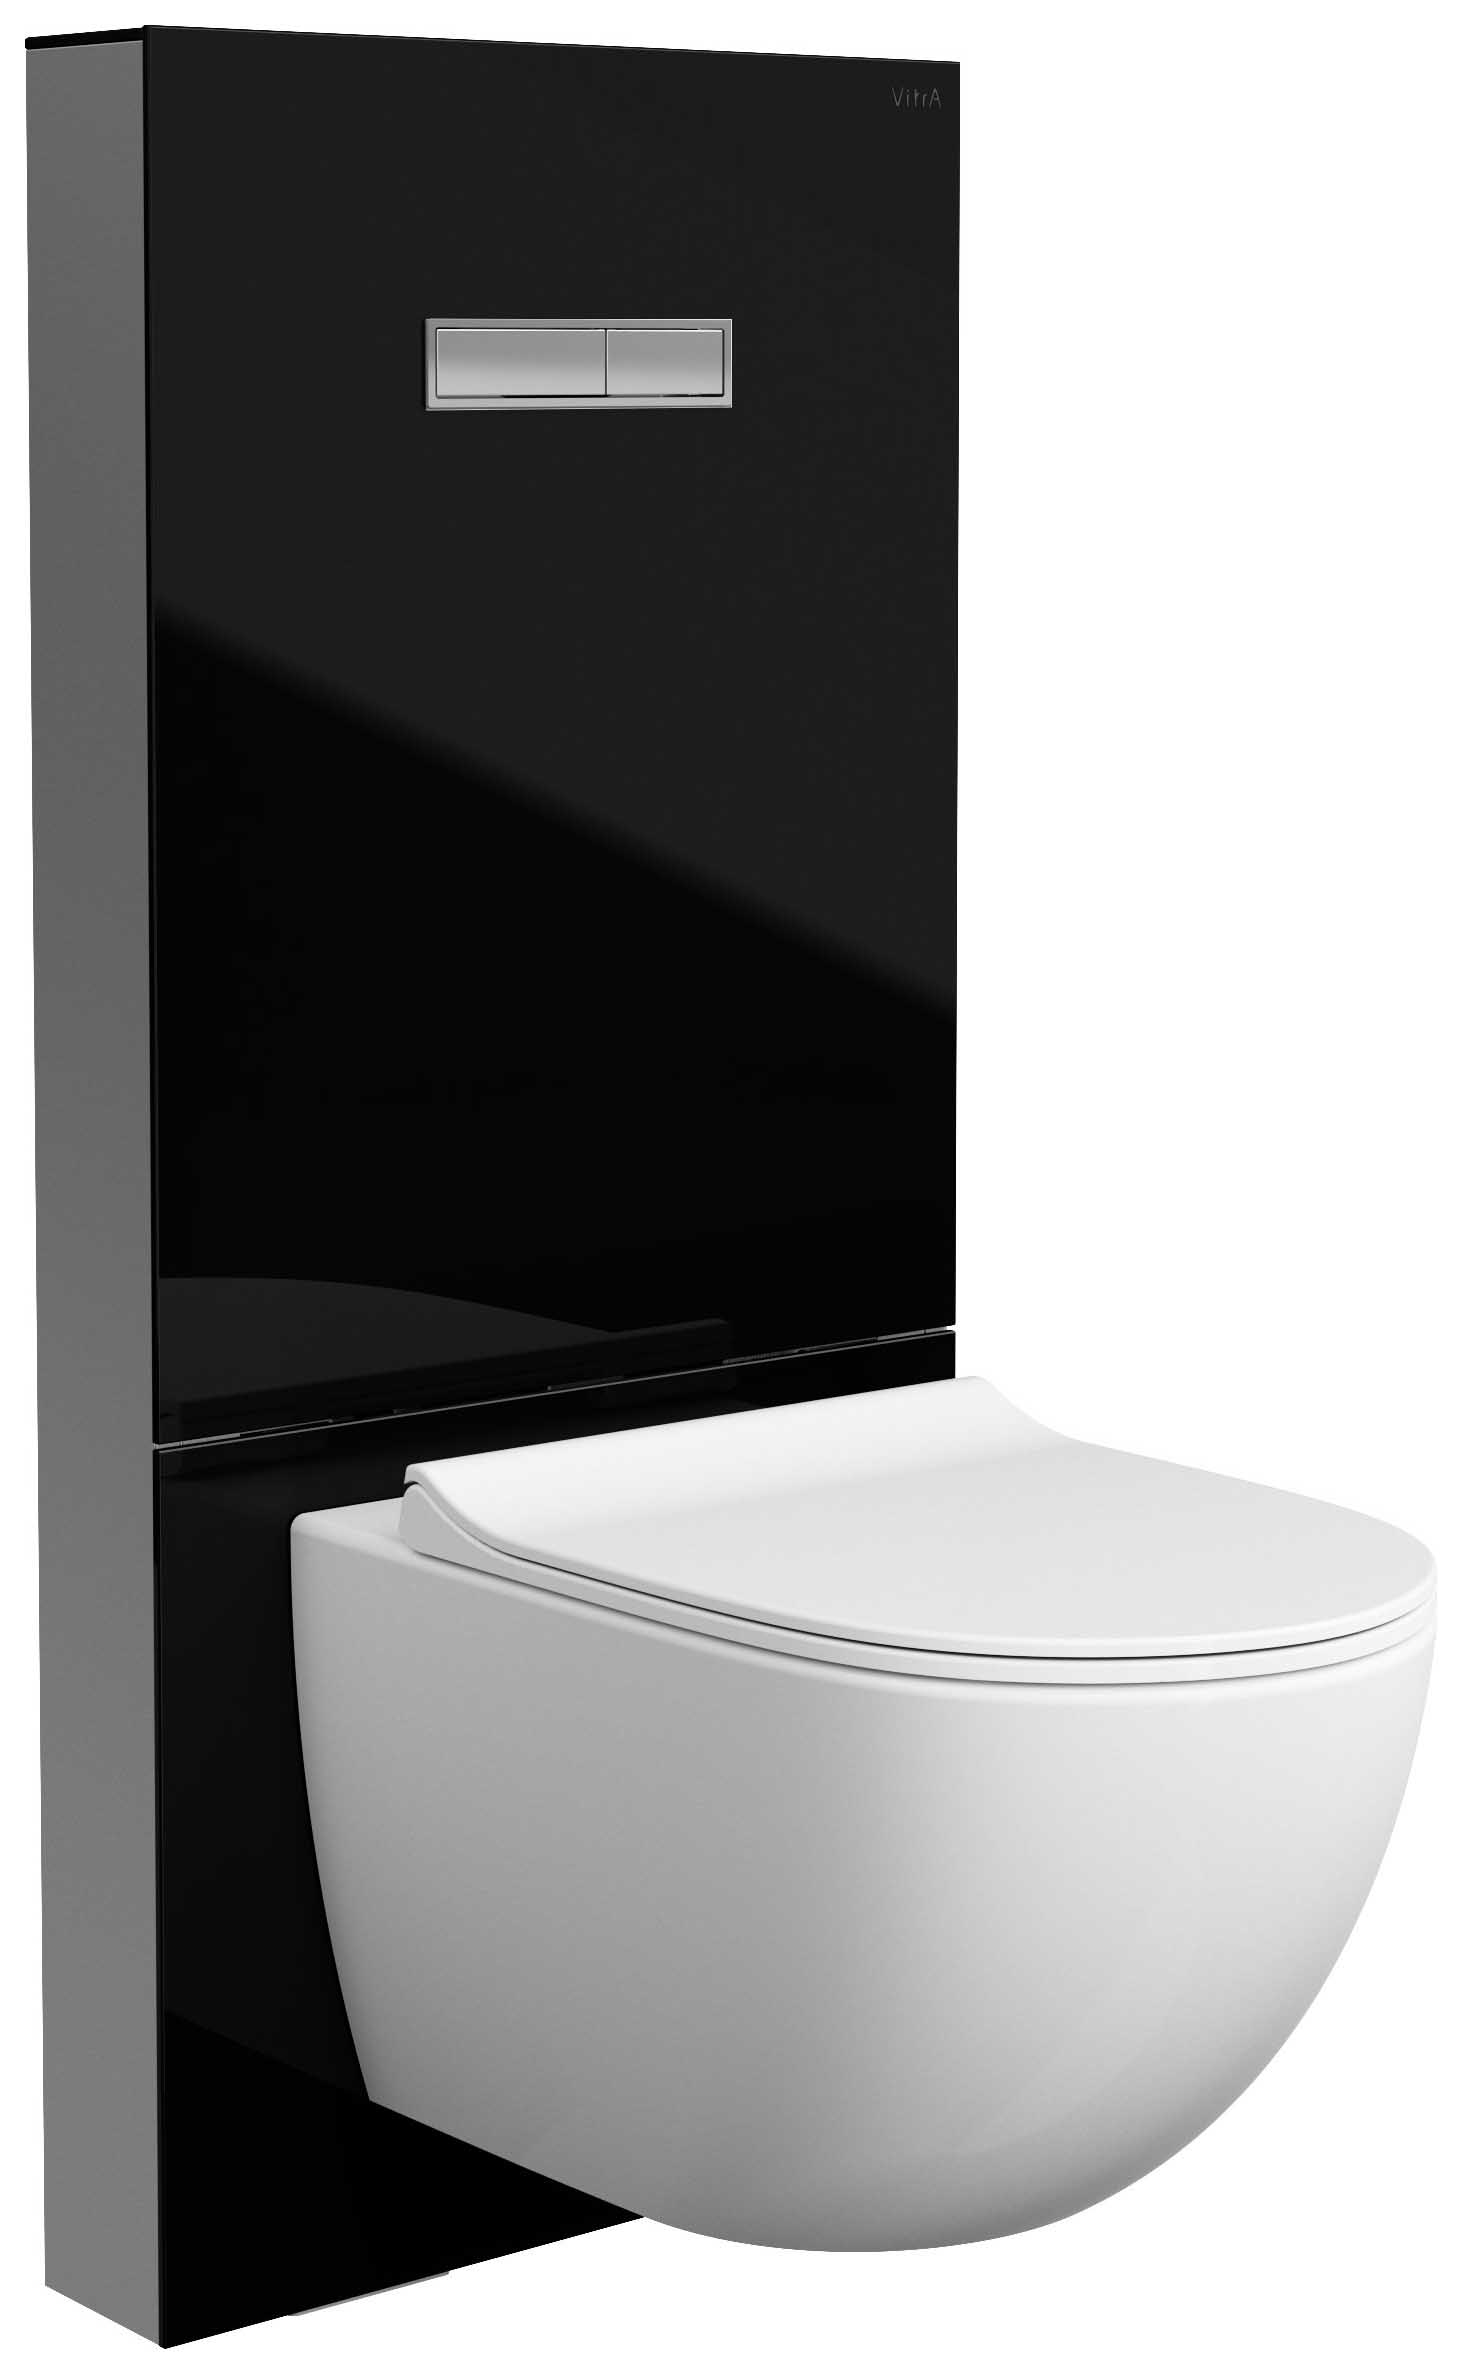 Image of VitrA Vitrus Glass Surround Concealed Cistern for Wall Hung Toilet Pans - Black